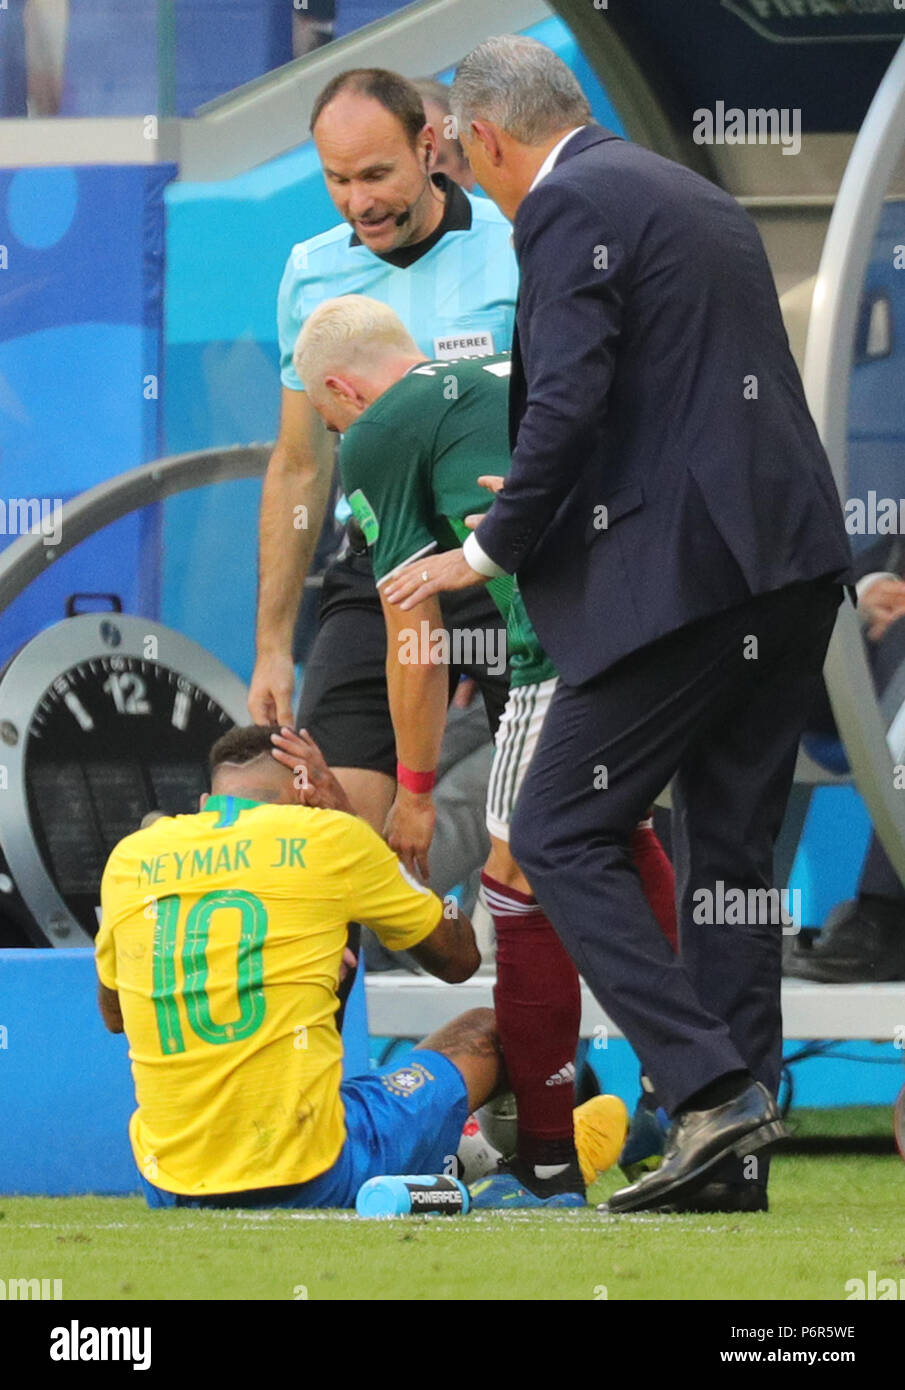 Samara, Russia. 02nd July, 2018. Soccer, World Cup 2018, Final round - round of 16: Mexico vs. Brazil at the Samara stadium: Brazil's Neymar (L) sitting on the floor after a duel while Mexico's Miguel Layun (C) and Brazil head coach Tite (R) argue. Credit: Christian Charisius/dpa/Alamy Live News Stock Photo